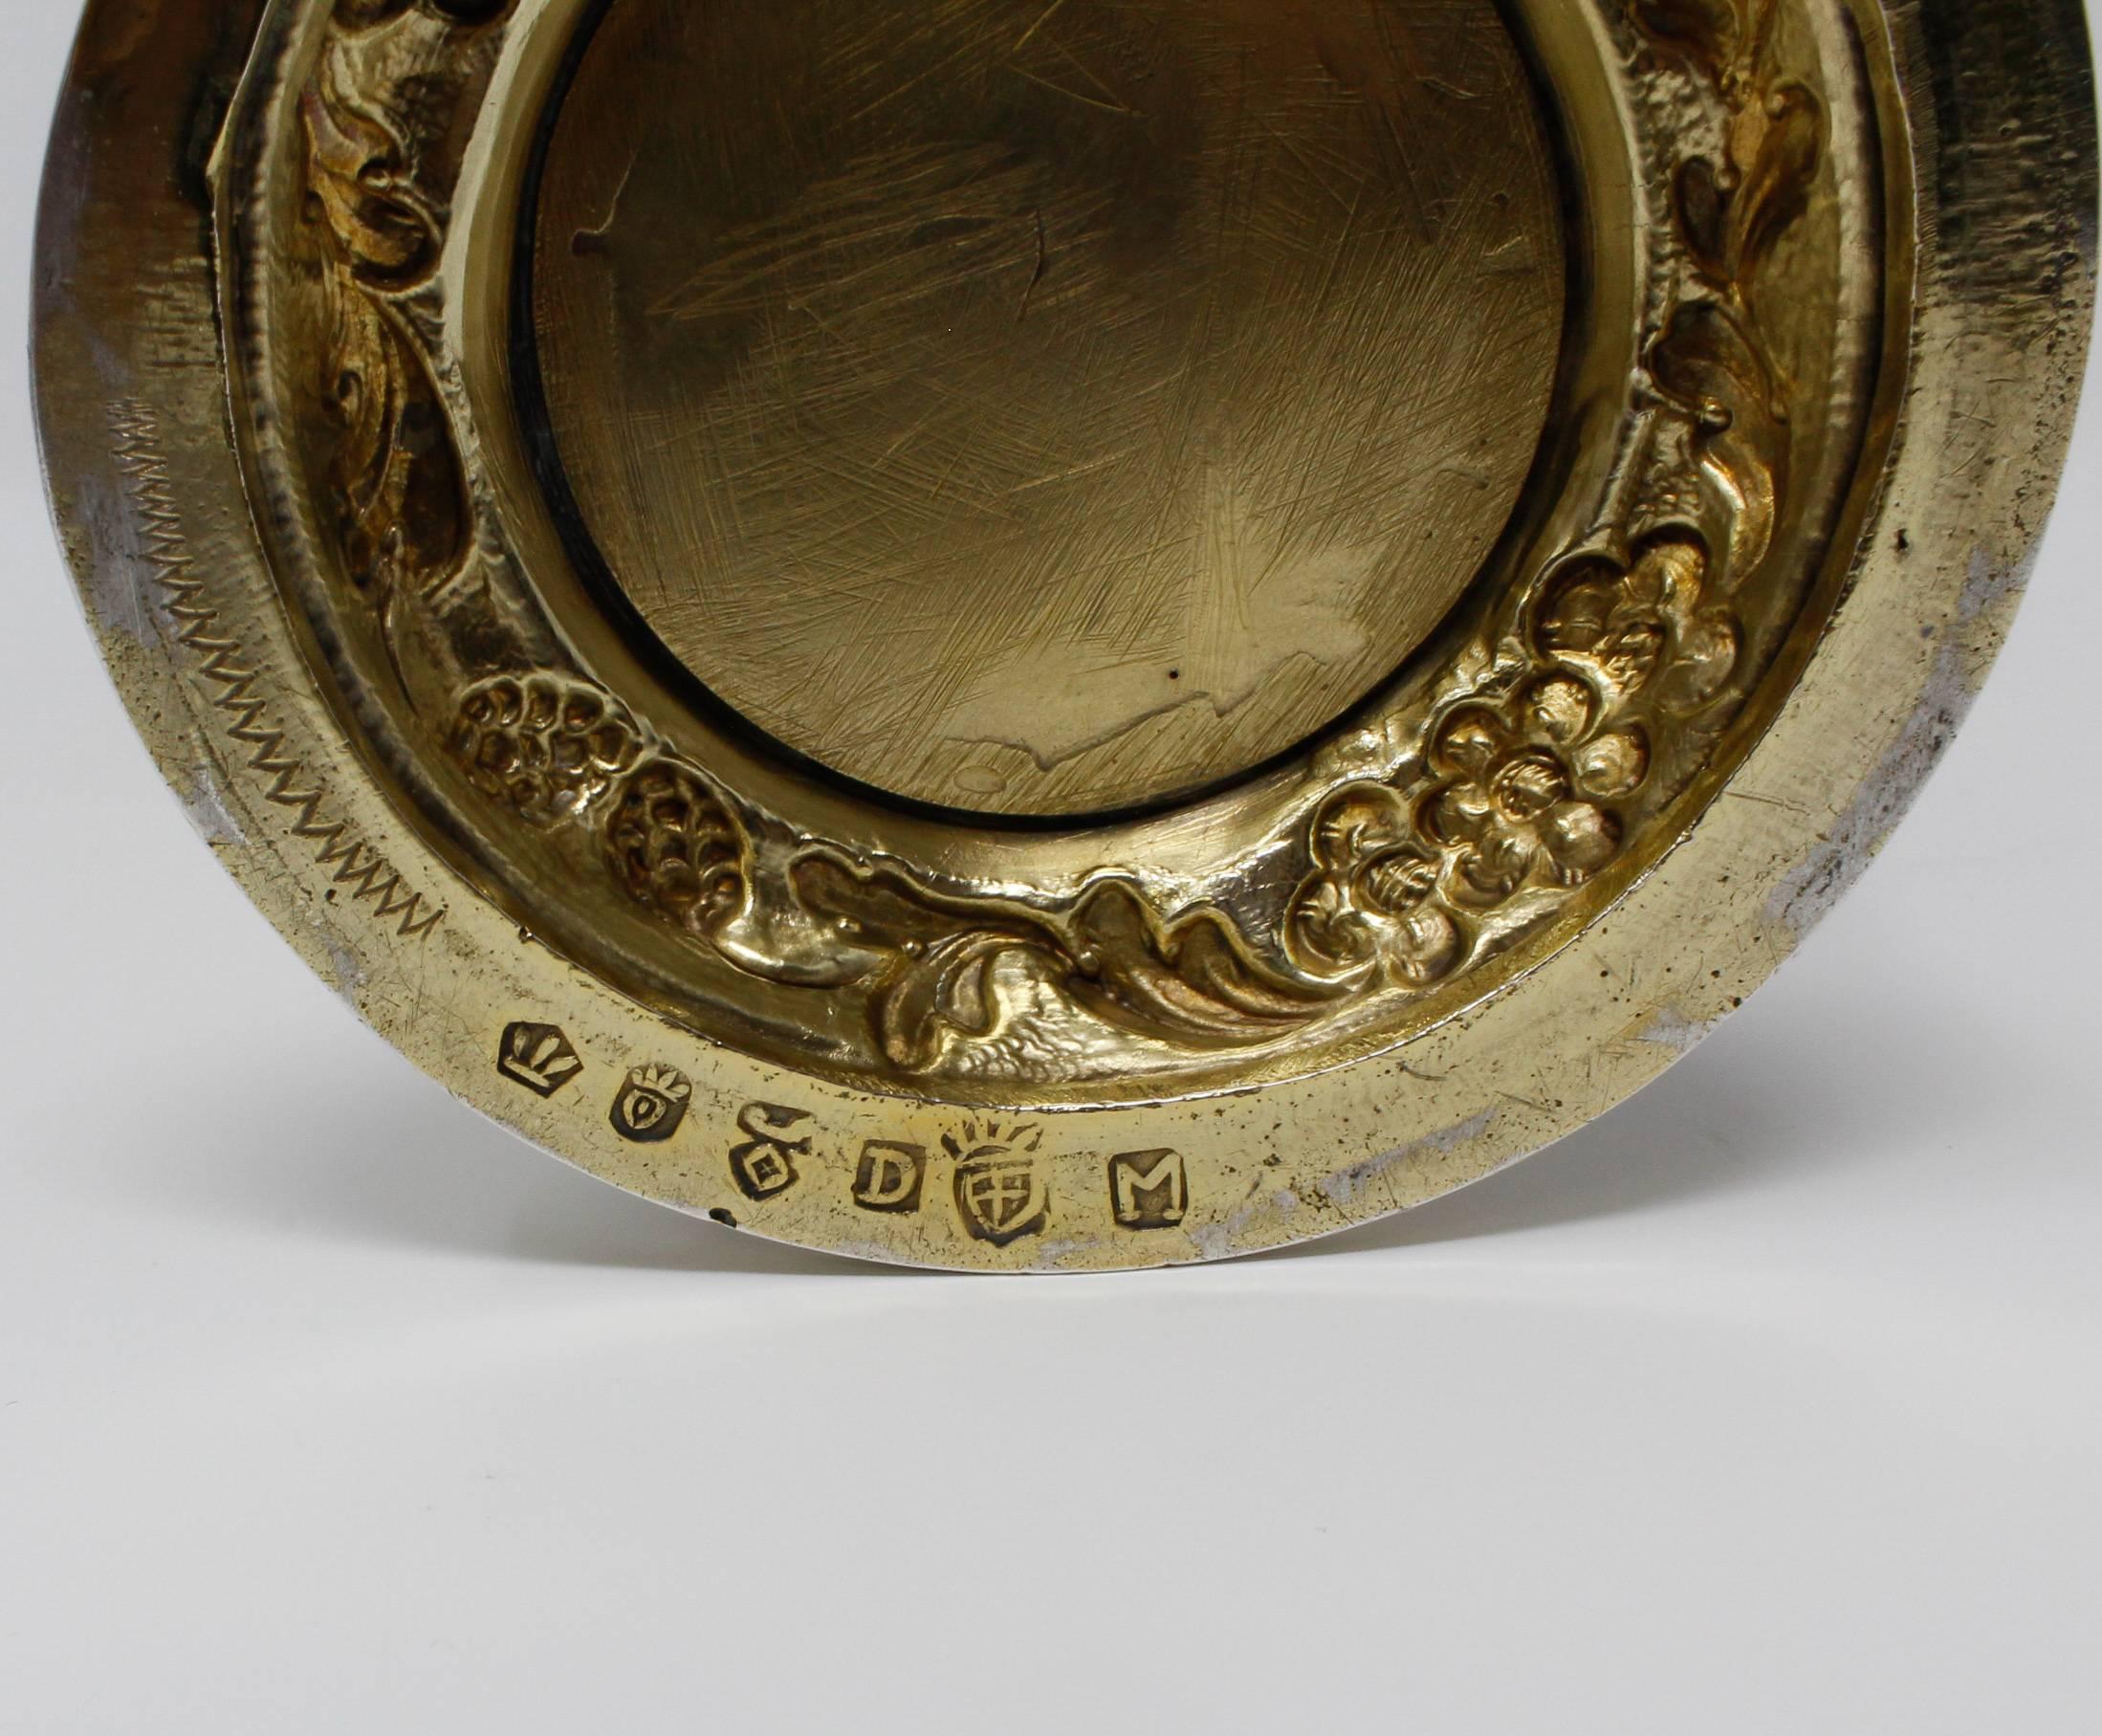 Covered Vases with Removable Lids, Gilt Silver, German in 17th Century Style For Sale 5